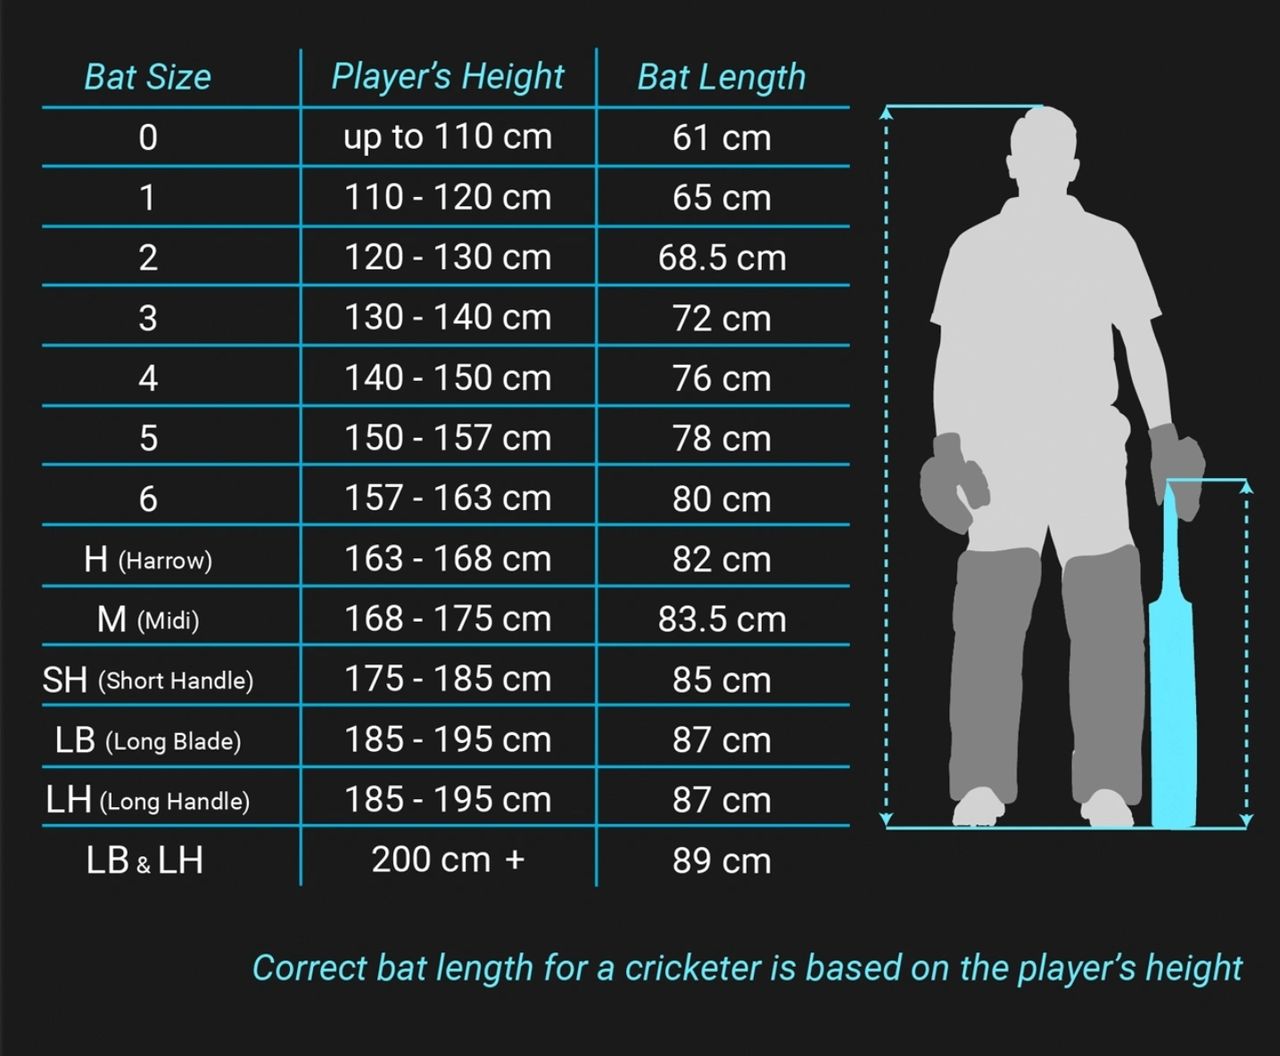 Cricket Bat Size Guide - Which is best for me?